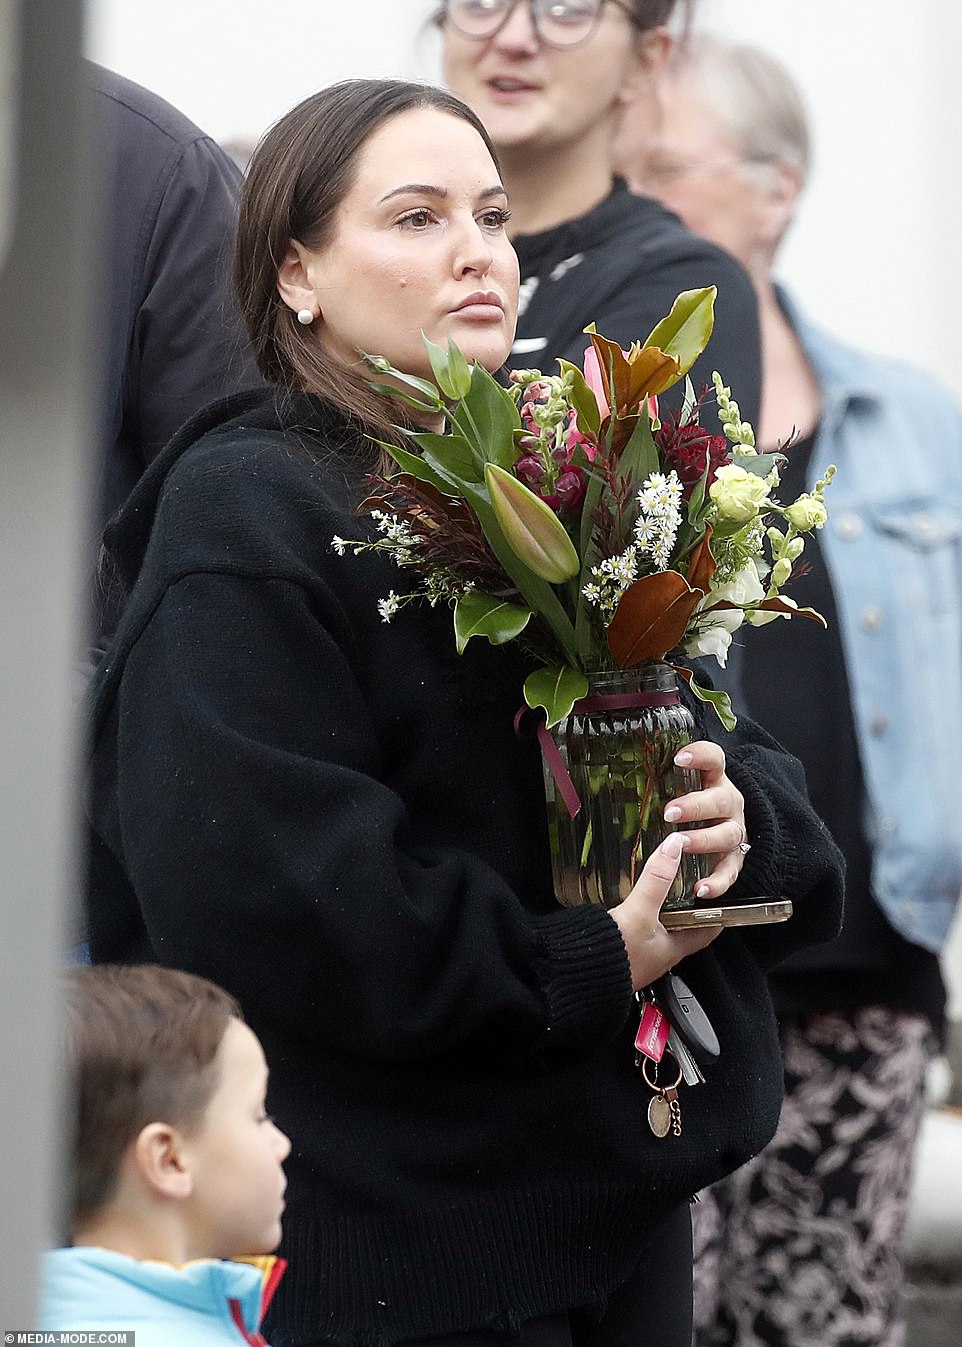 A woman held a vase of flowers at the march in Ballarat on Friday night.